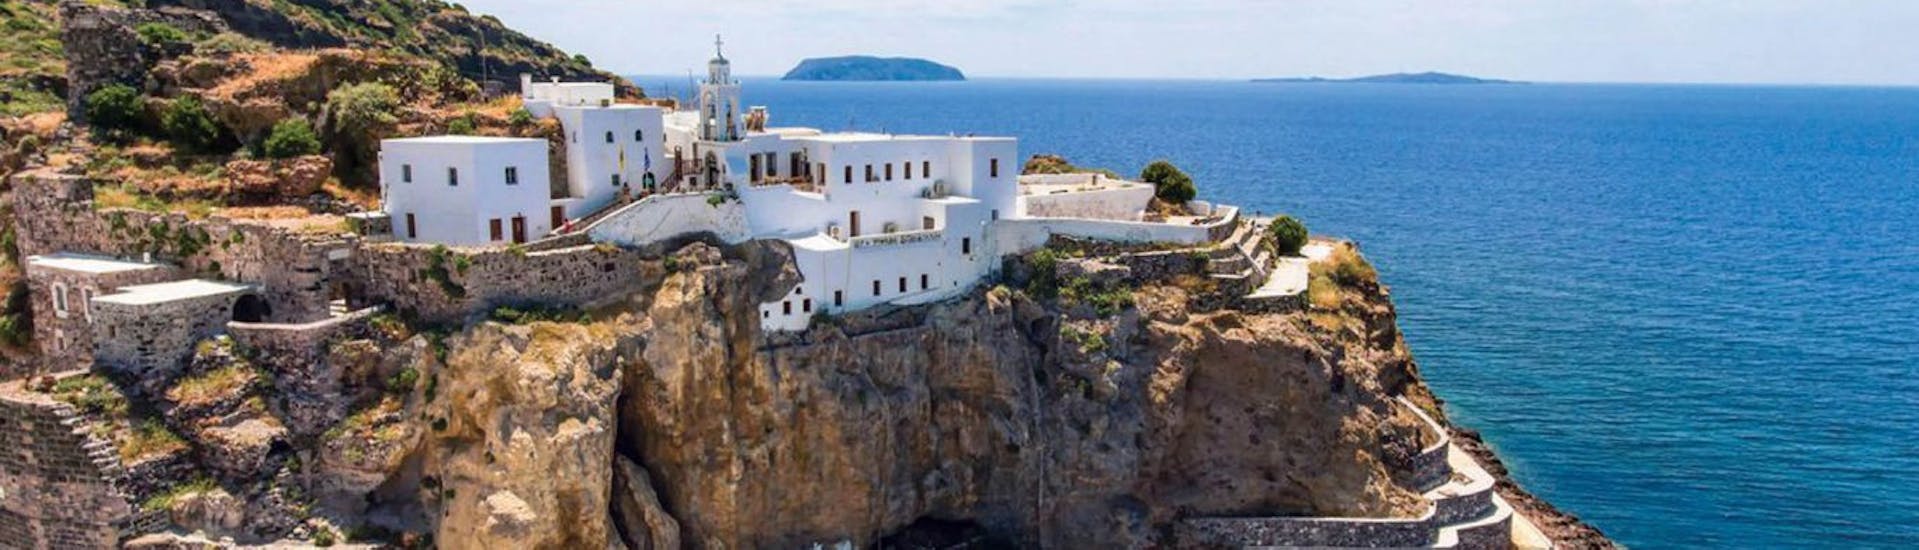 View of the monastery, which you can visit during the Boat Trip to Nisyros with Volcano Sightseeing from Kardamena with Sail Away Kos.